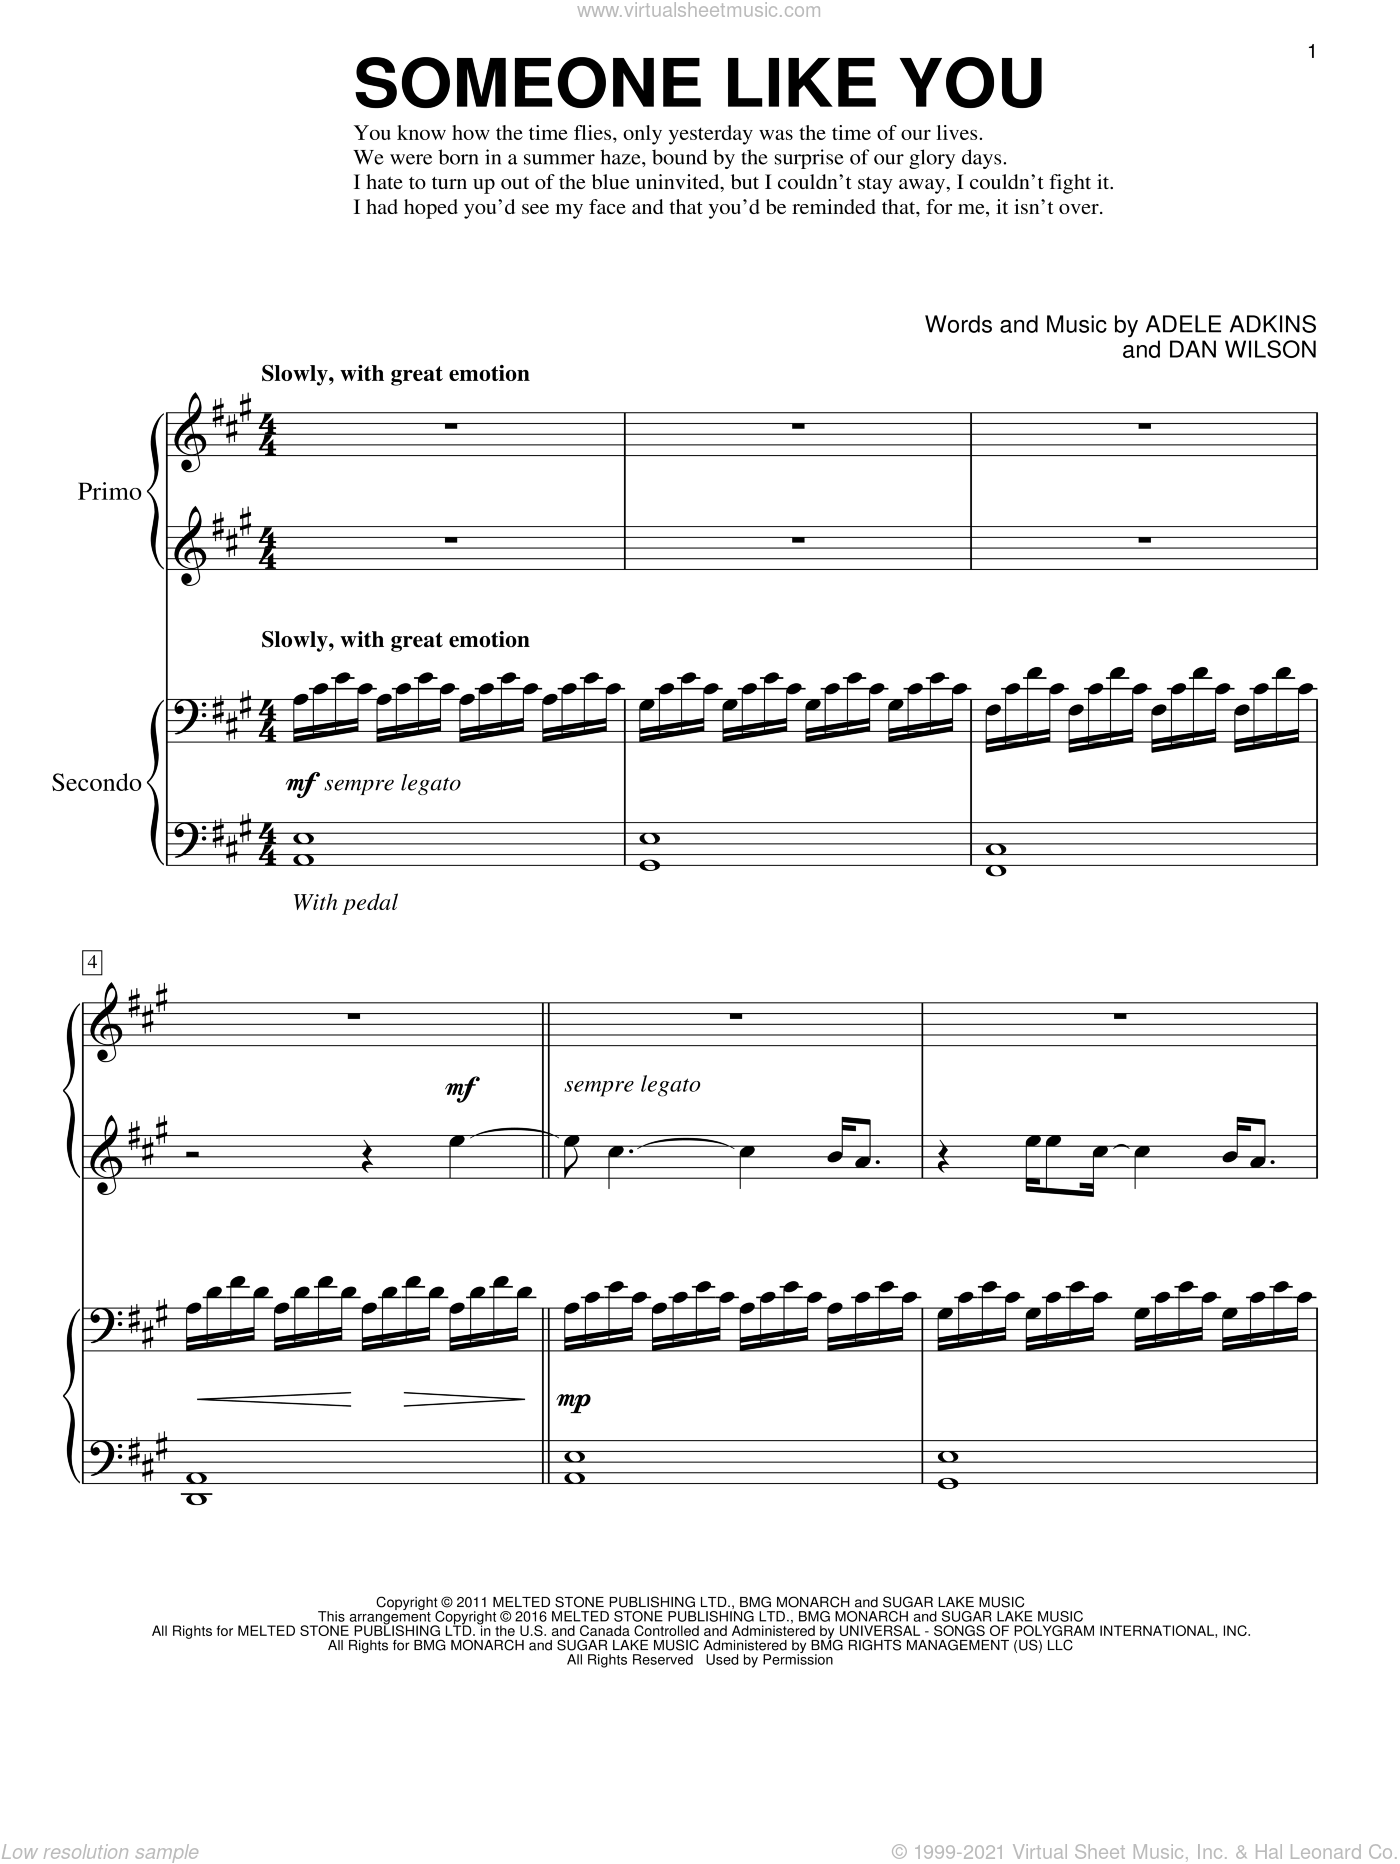 Adele - Someone Like You sheet music for piano four hands [PDF]1400 x 1864